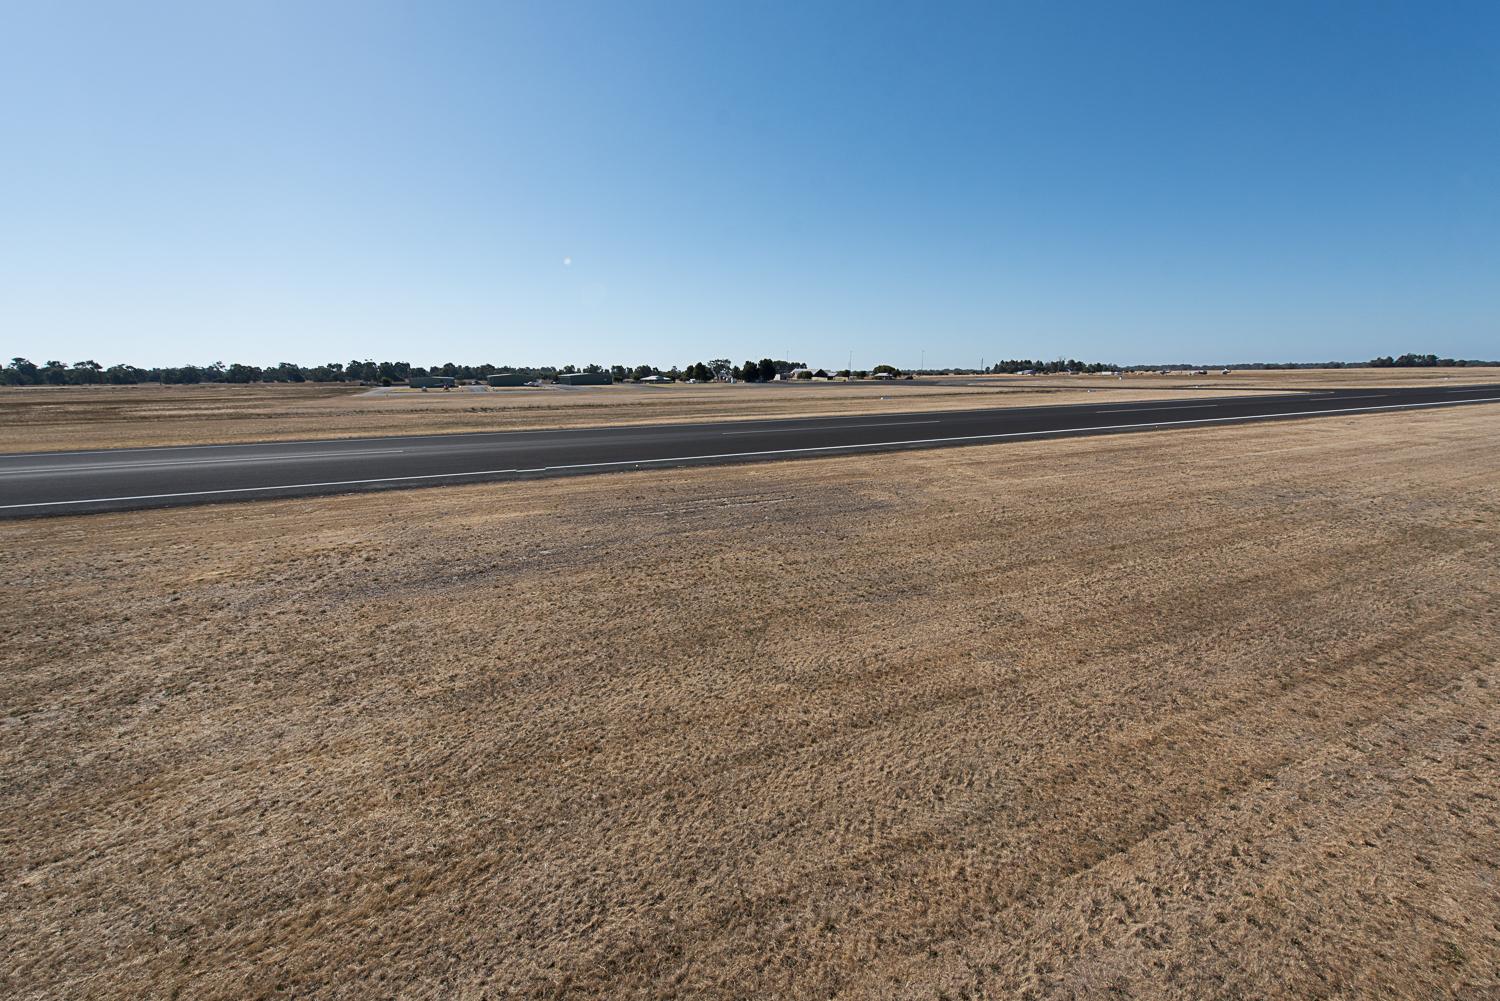 View of airport runway on clear blue sky day